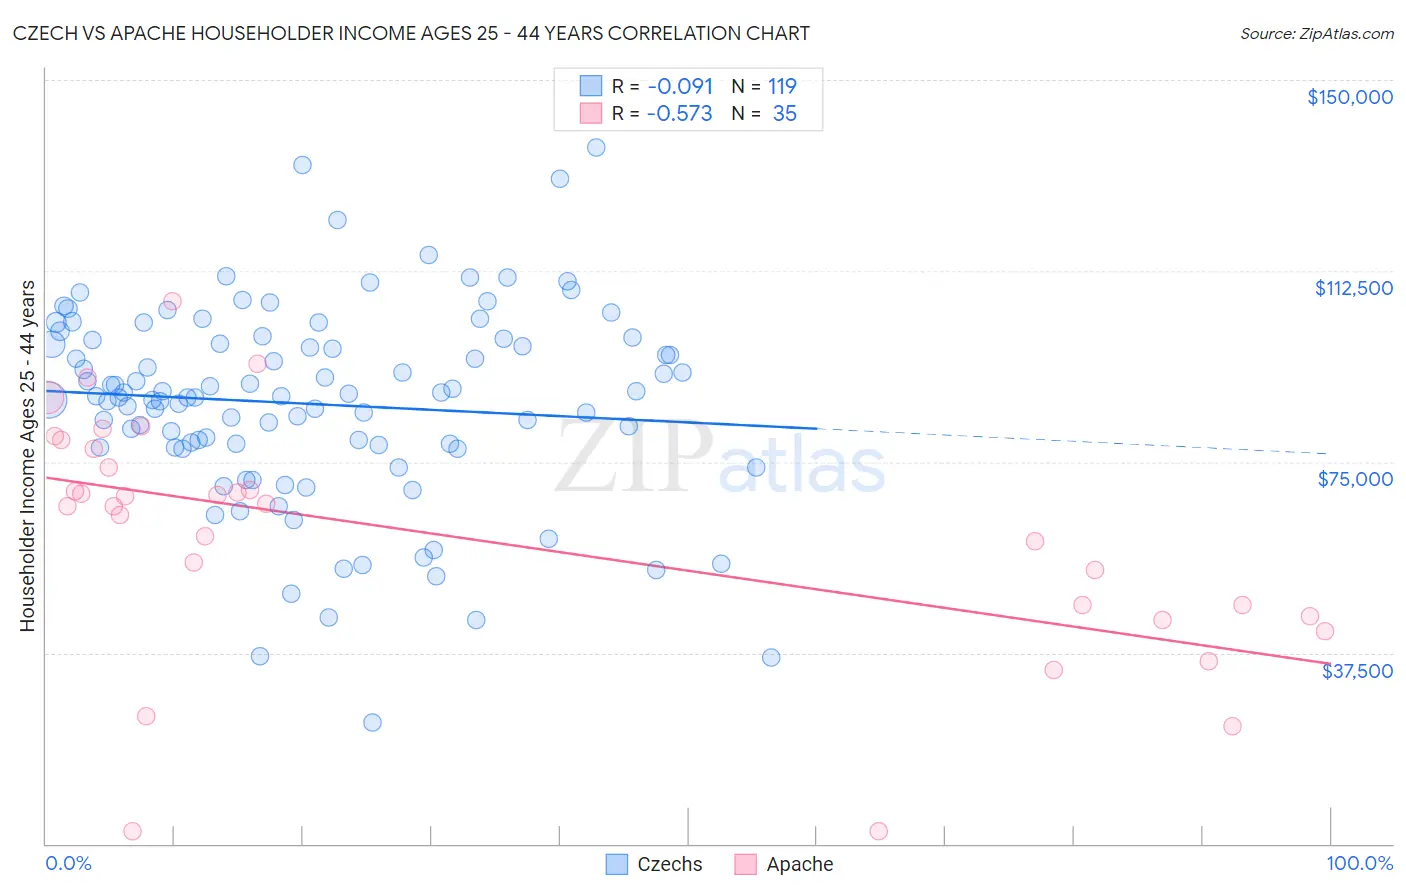 Czech vs Apache Householder Income Ages 25 - 44 years